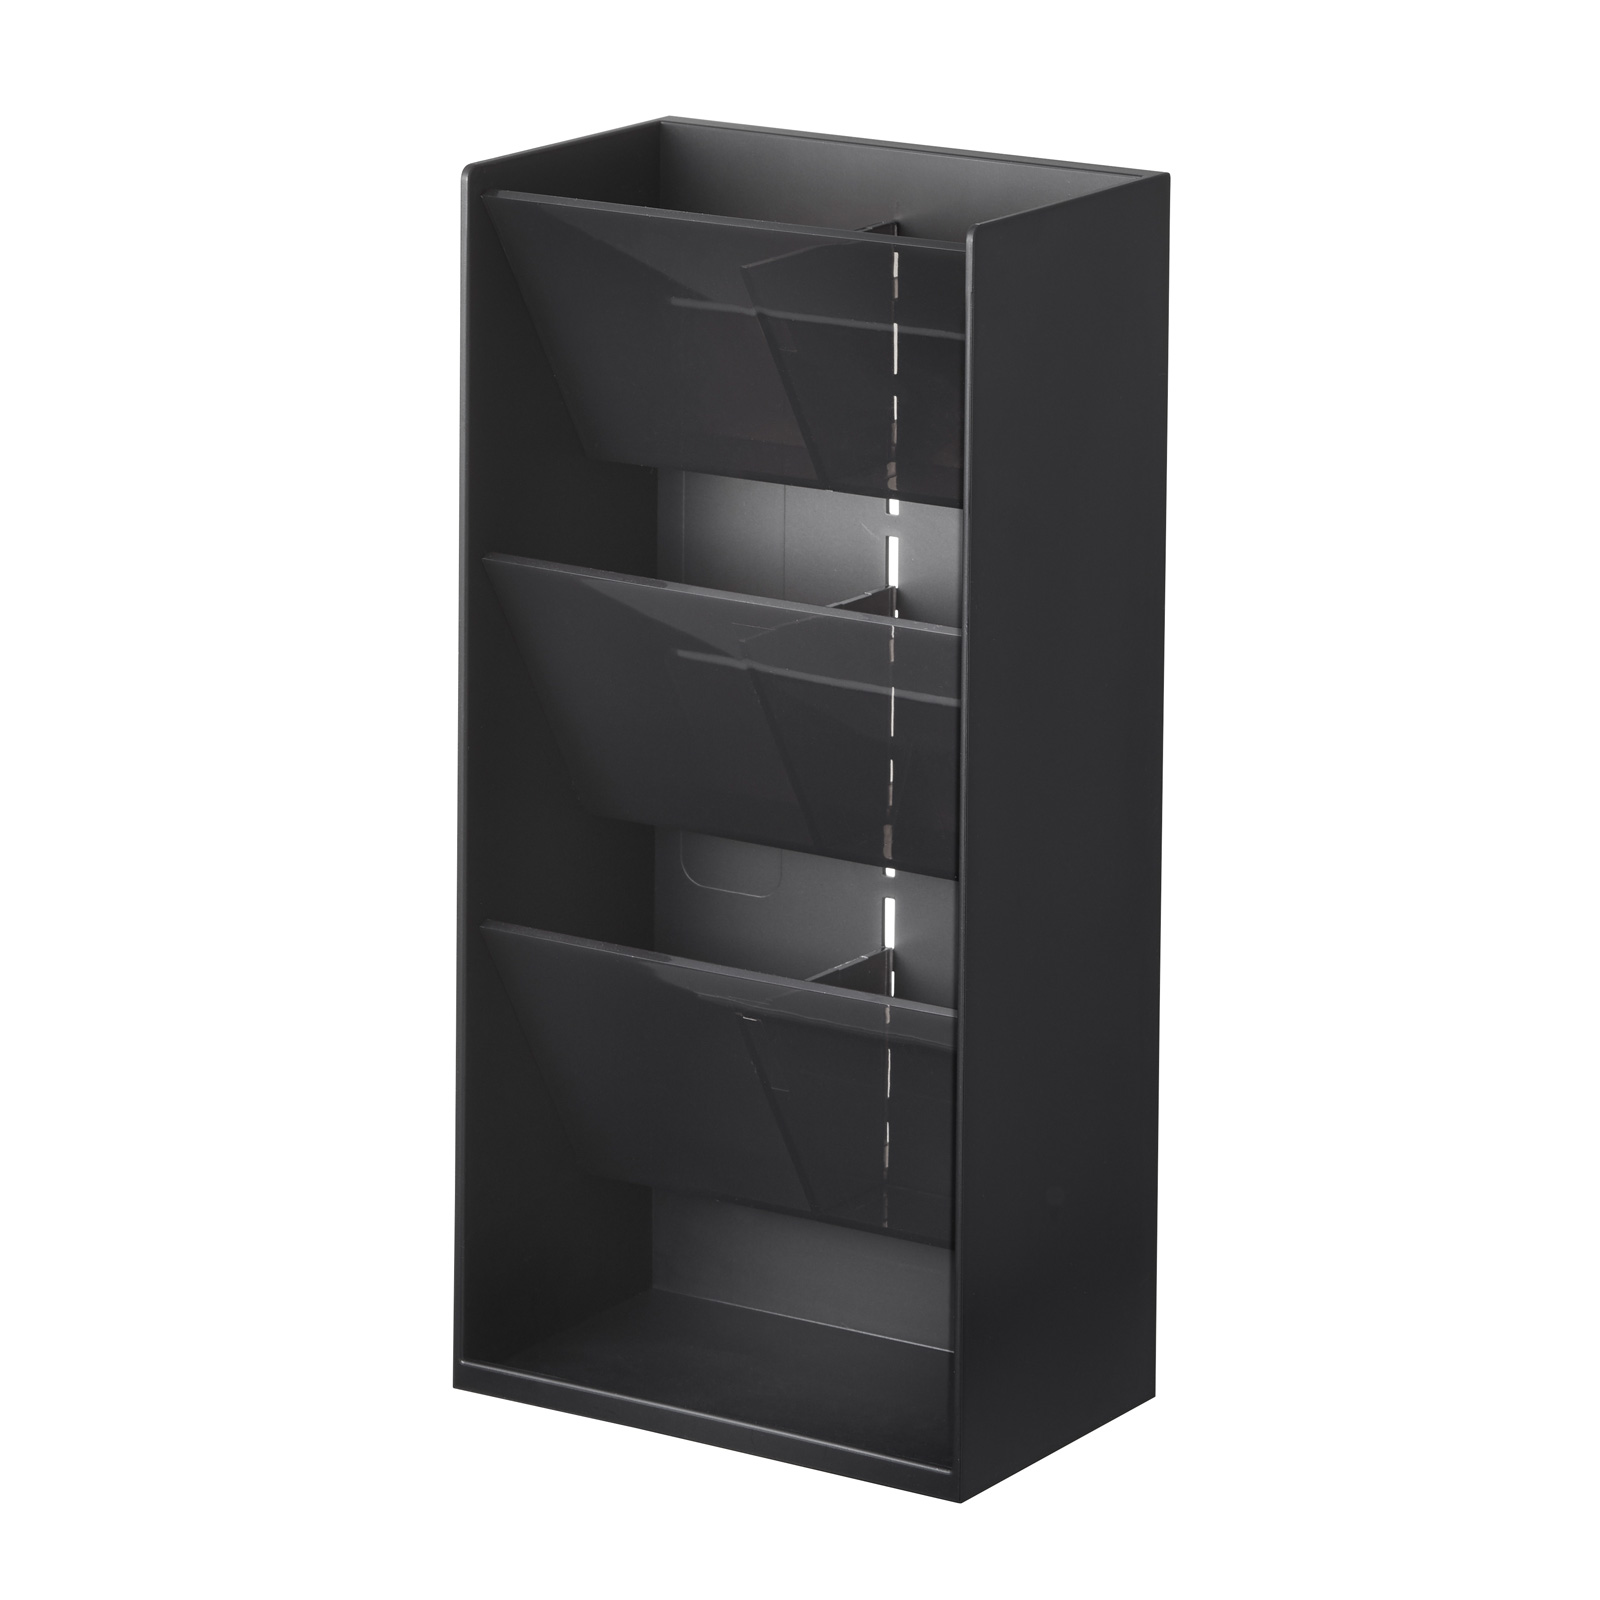 Support pour make-up TOWER noir 